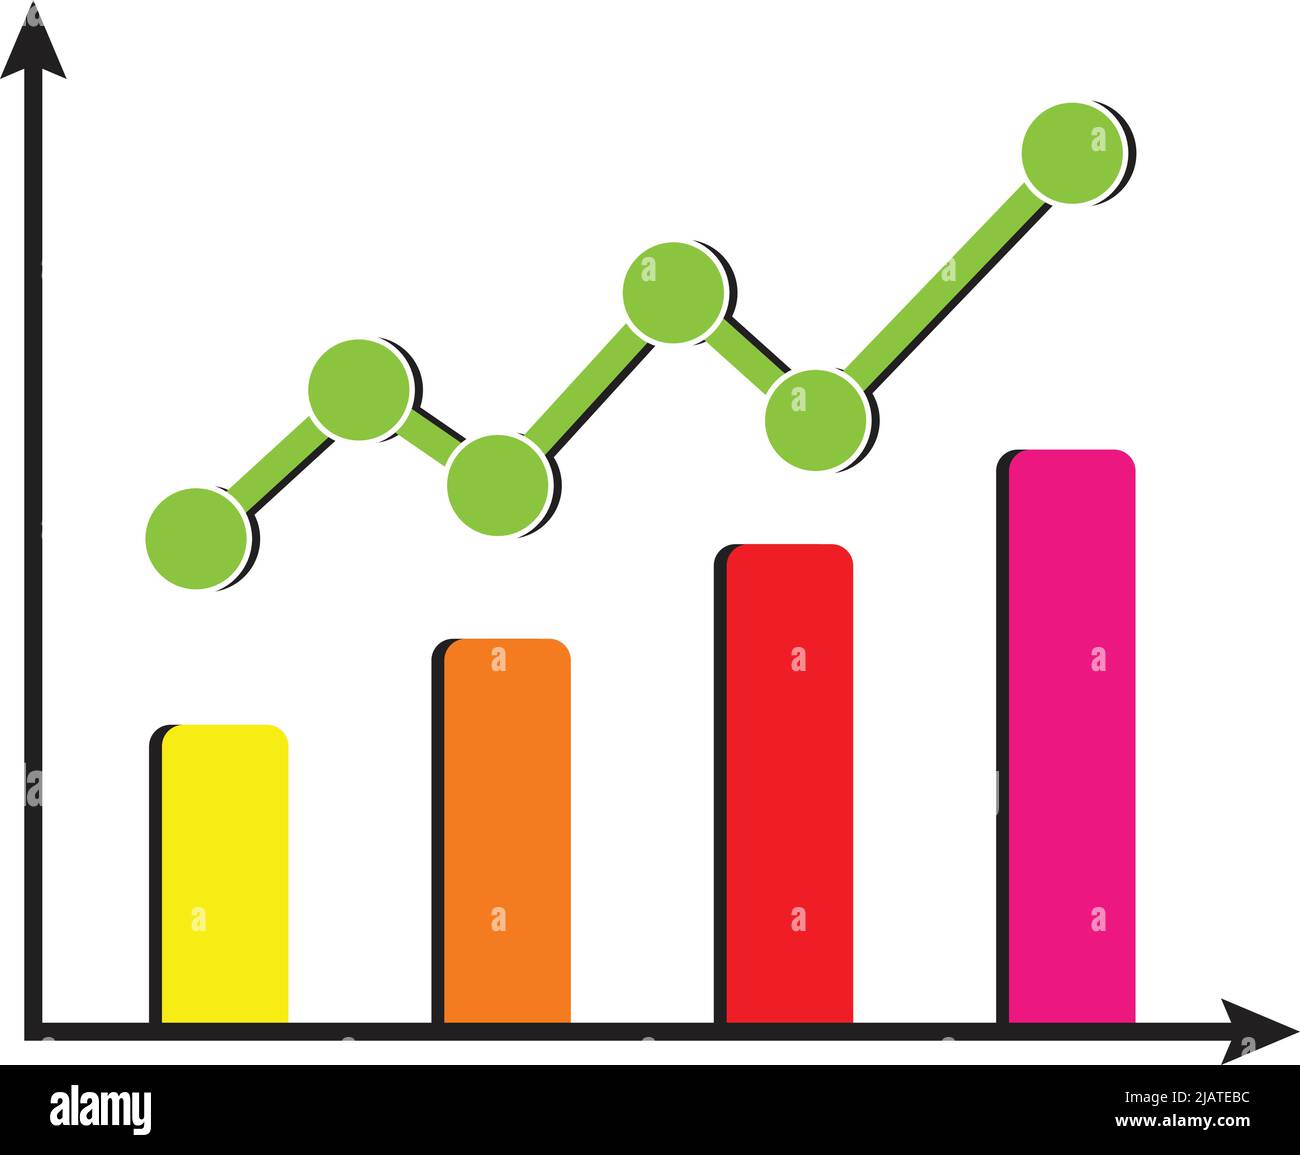 illustration of value increase graph and color full bars. on white background Stock Vector